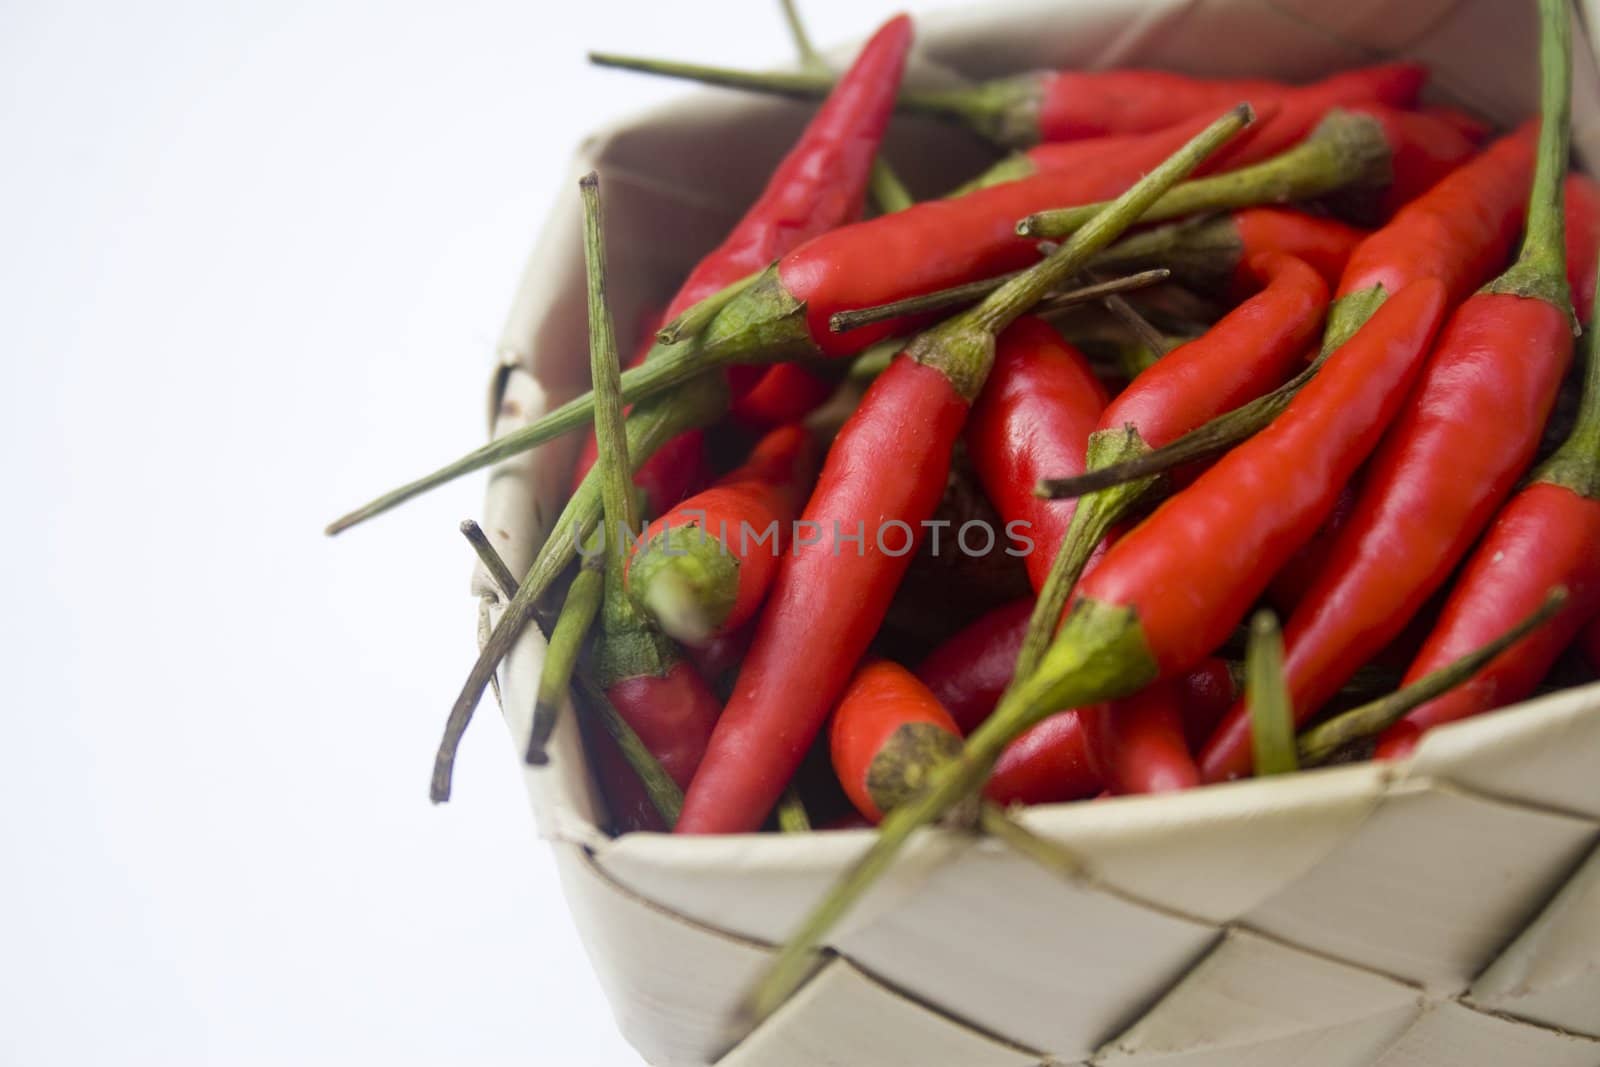 A small woven basket filled with small red chili peppers